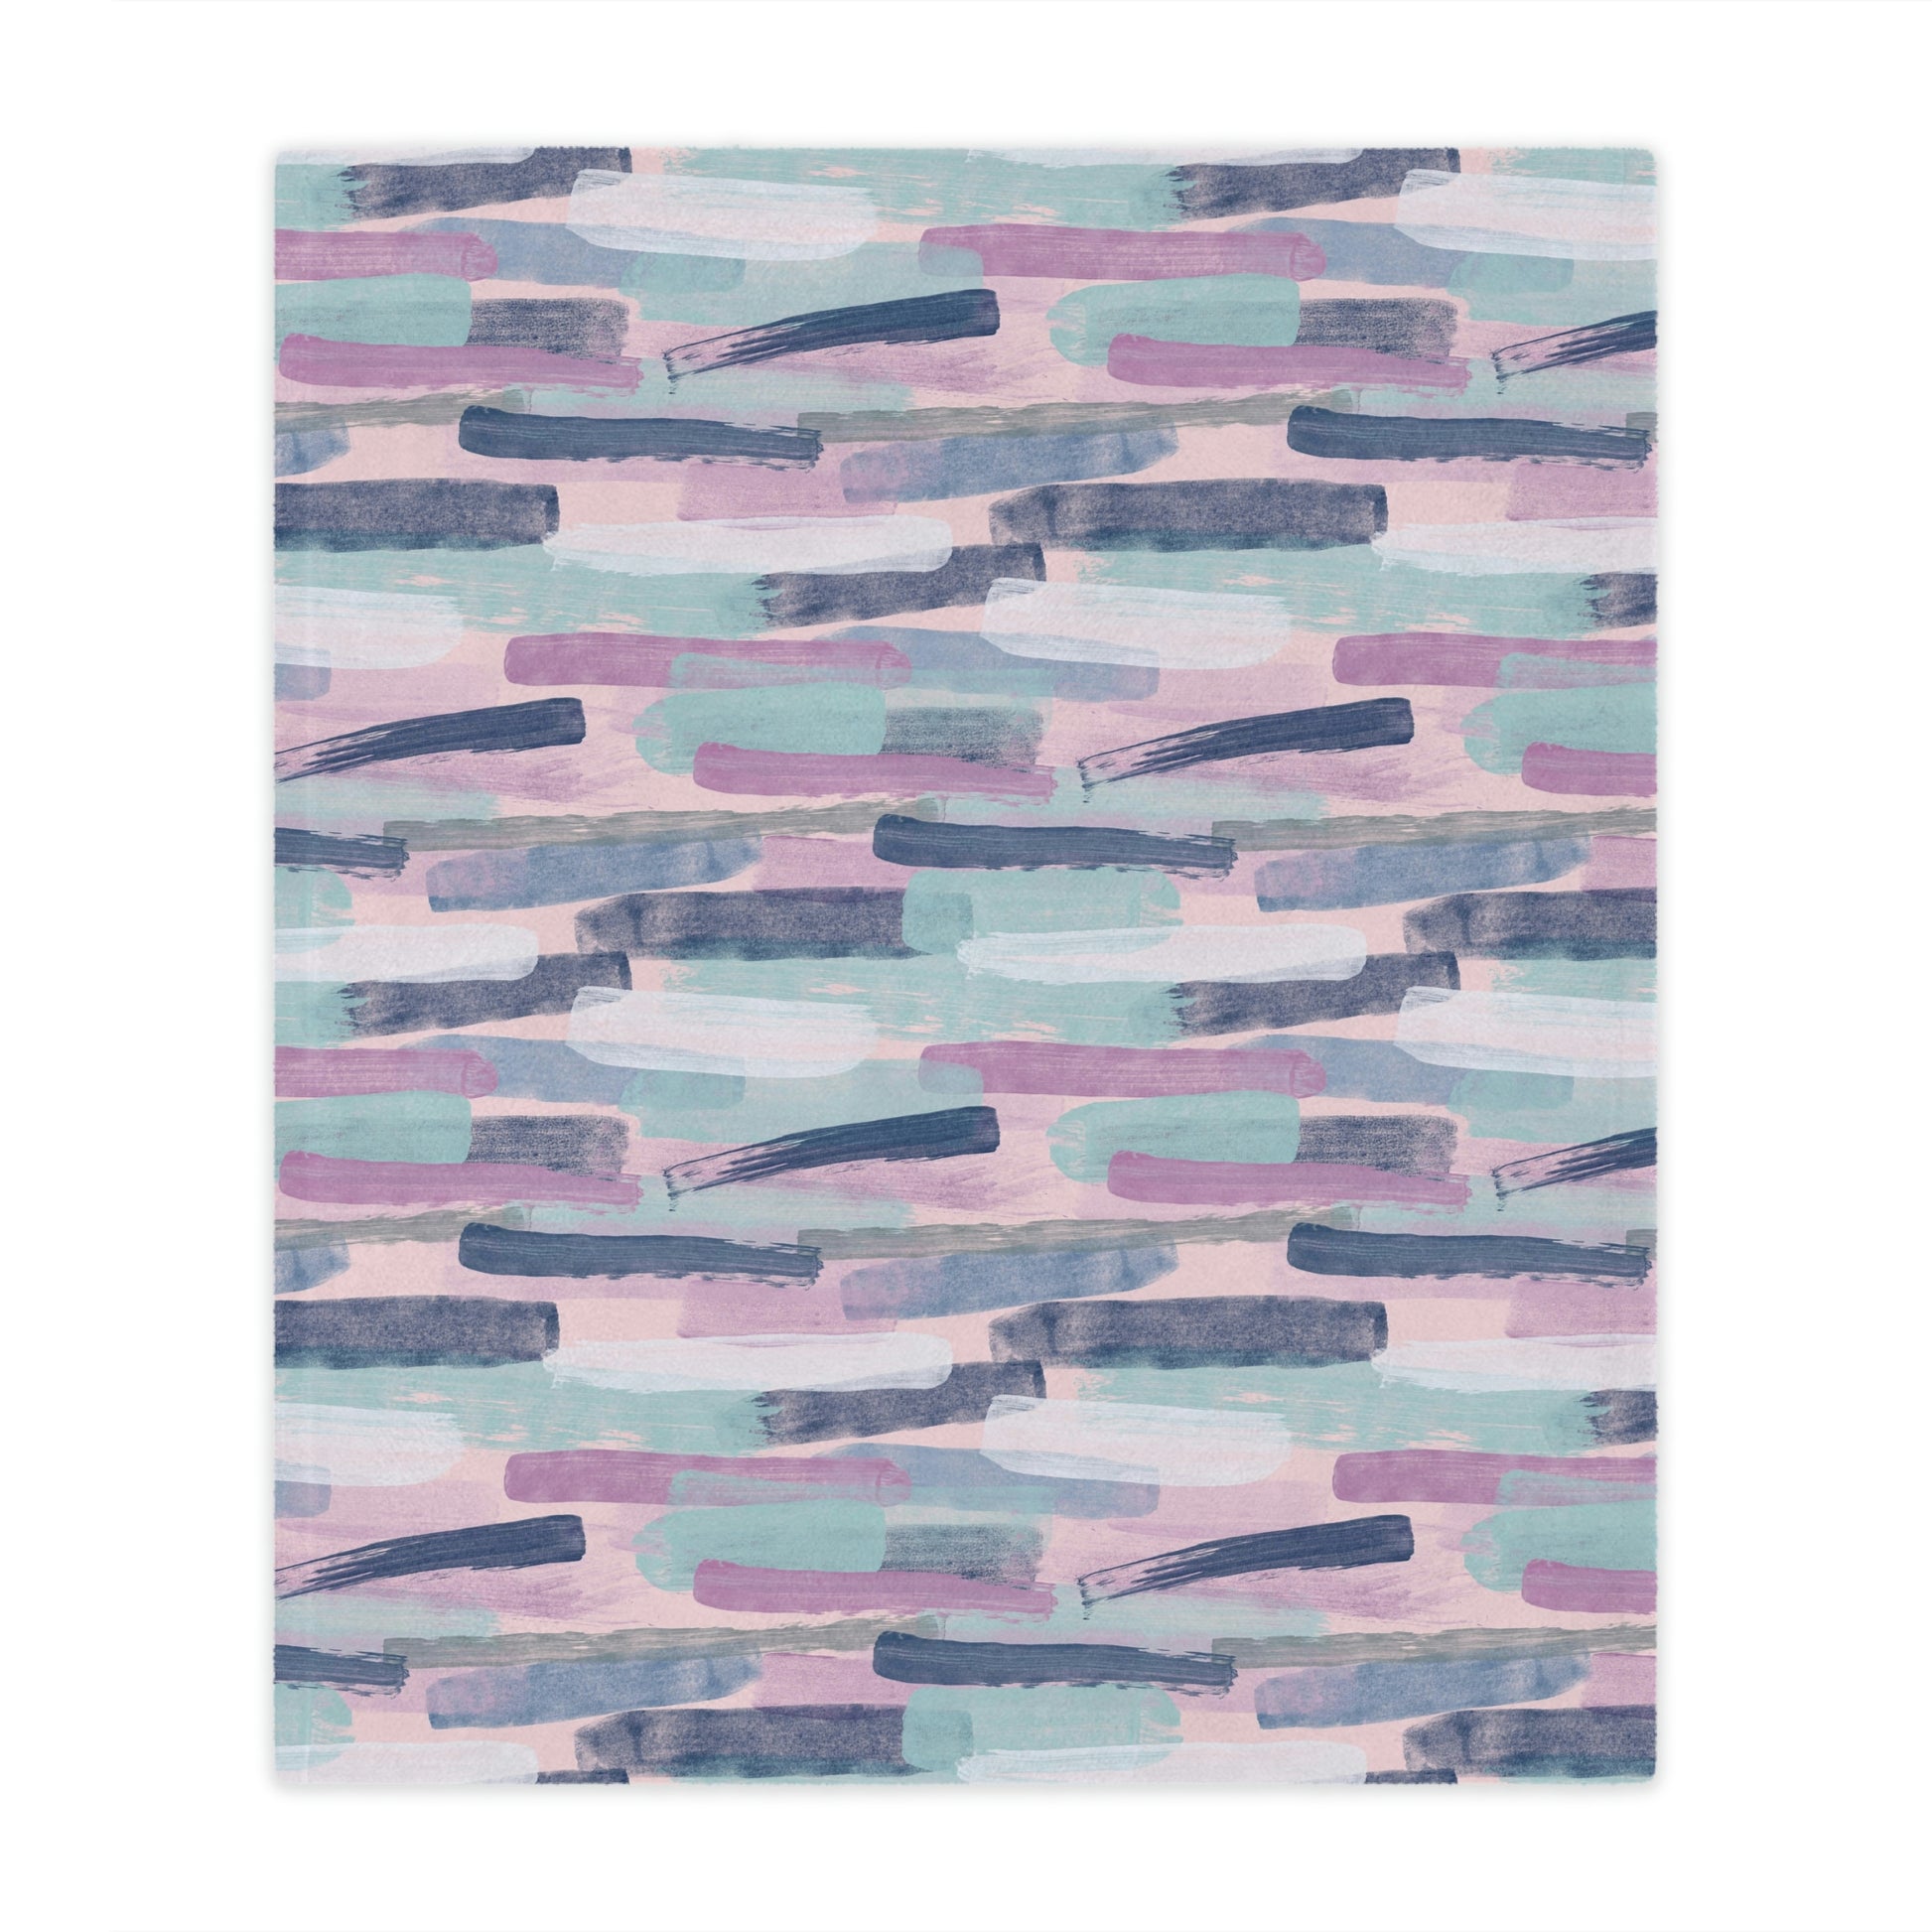 watercolor brush stroke throw blanket on a bed, decorate your bedroom with purple and pink throw blankets on your bedroom, blue and purple plush throw blanket draped on a bed